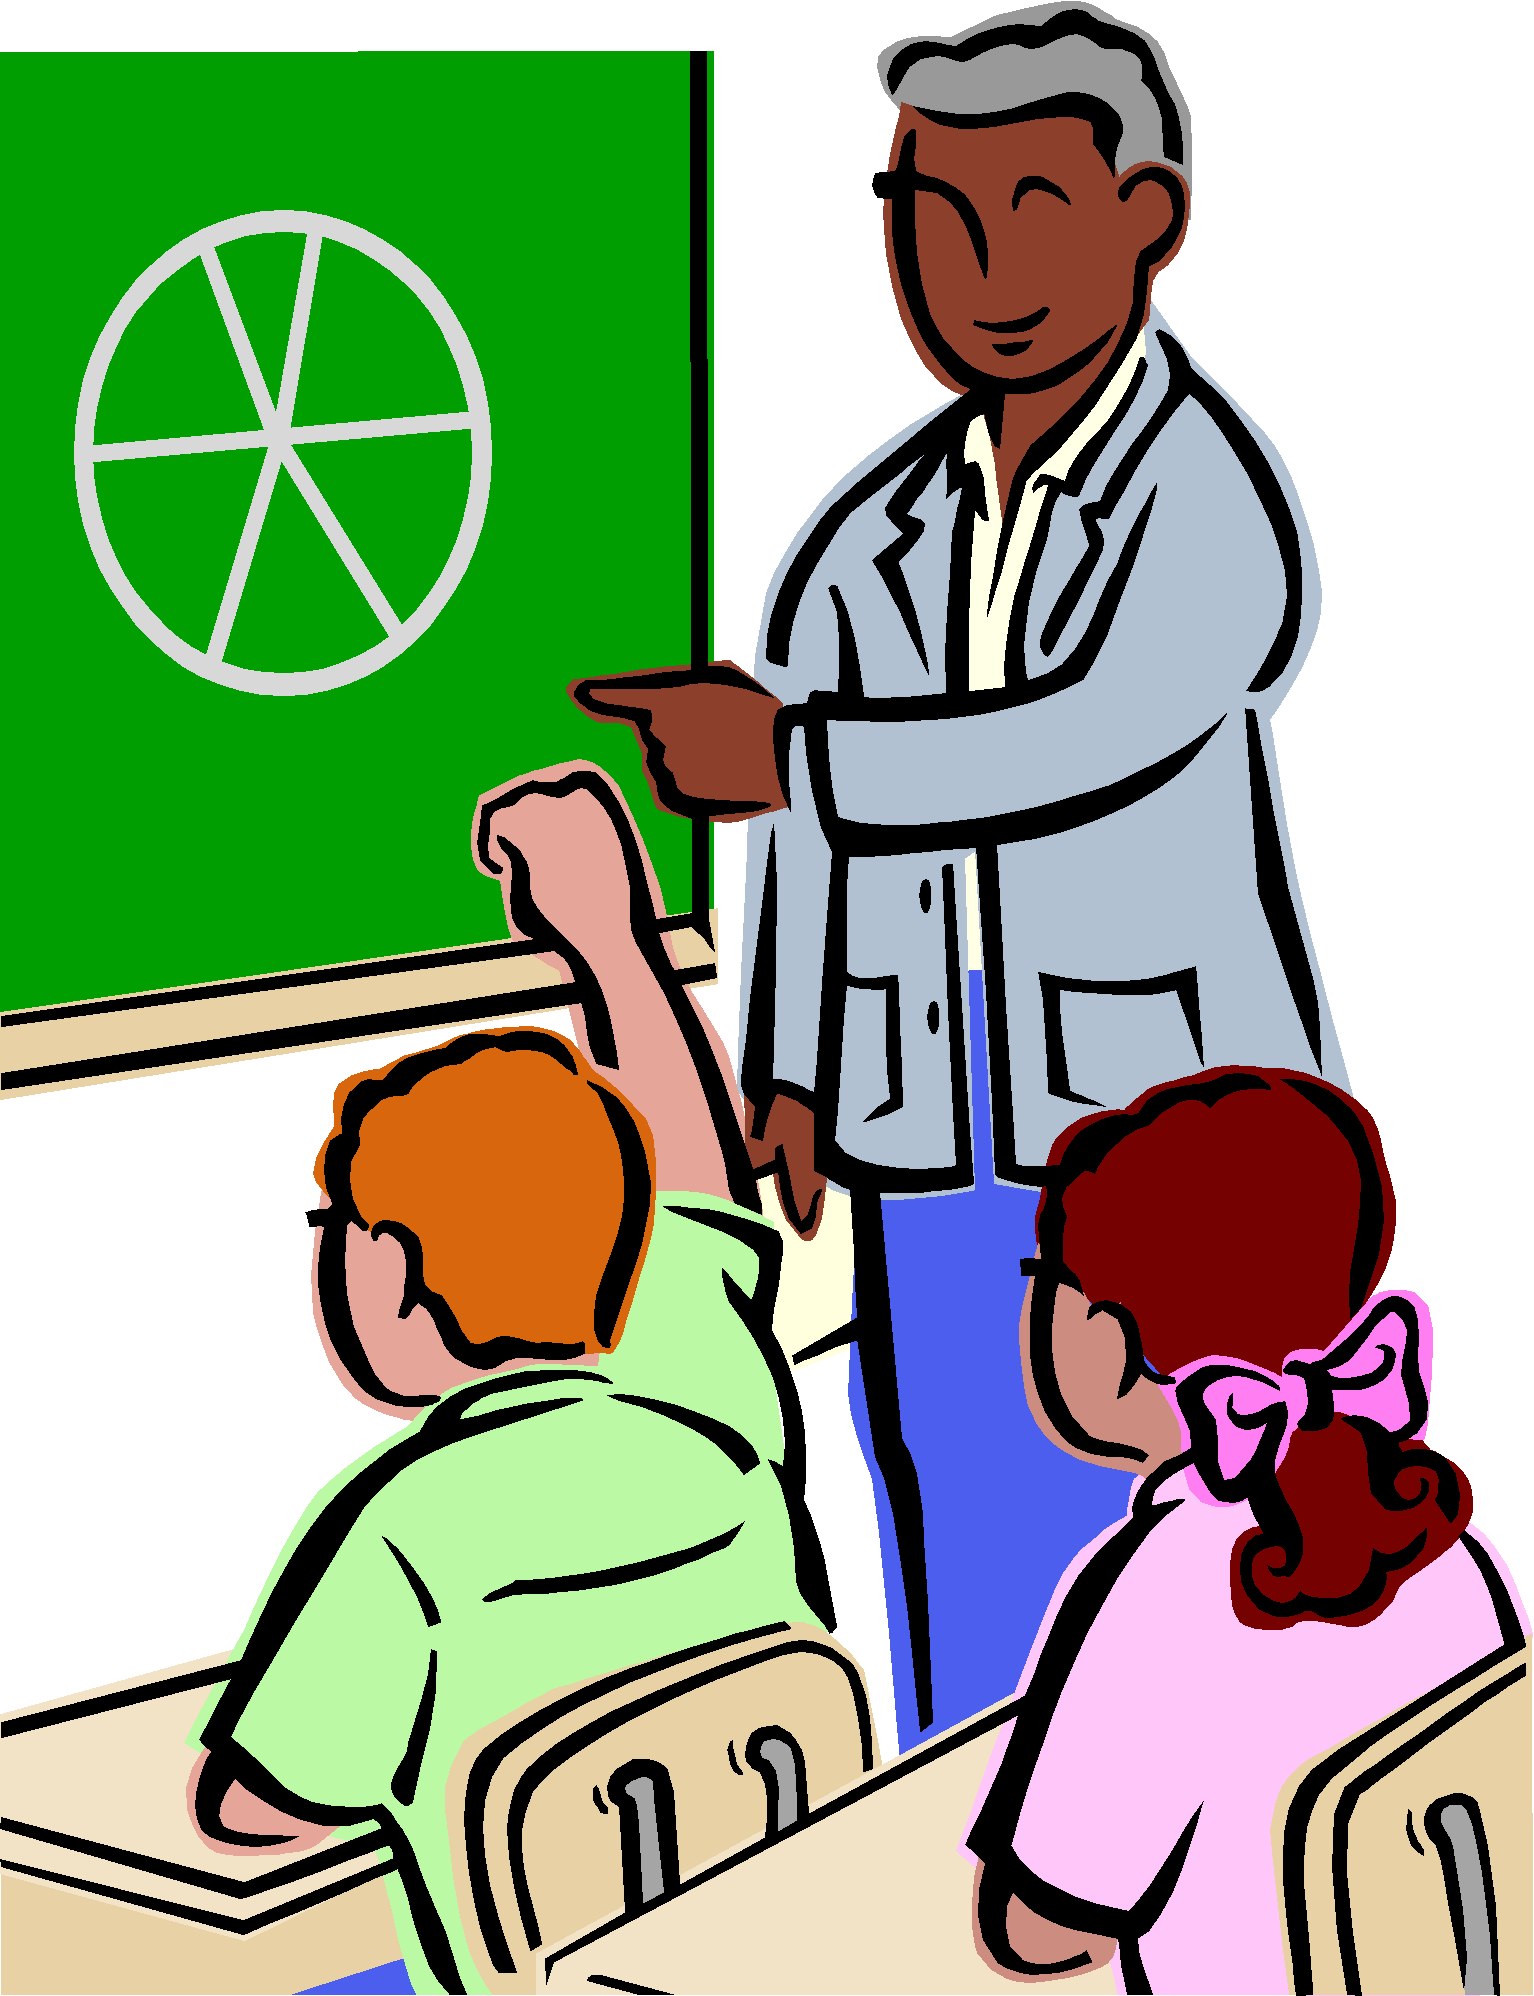 Clipart Of Teacher With Students - Clipart library